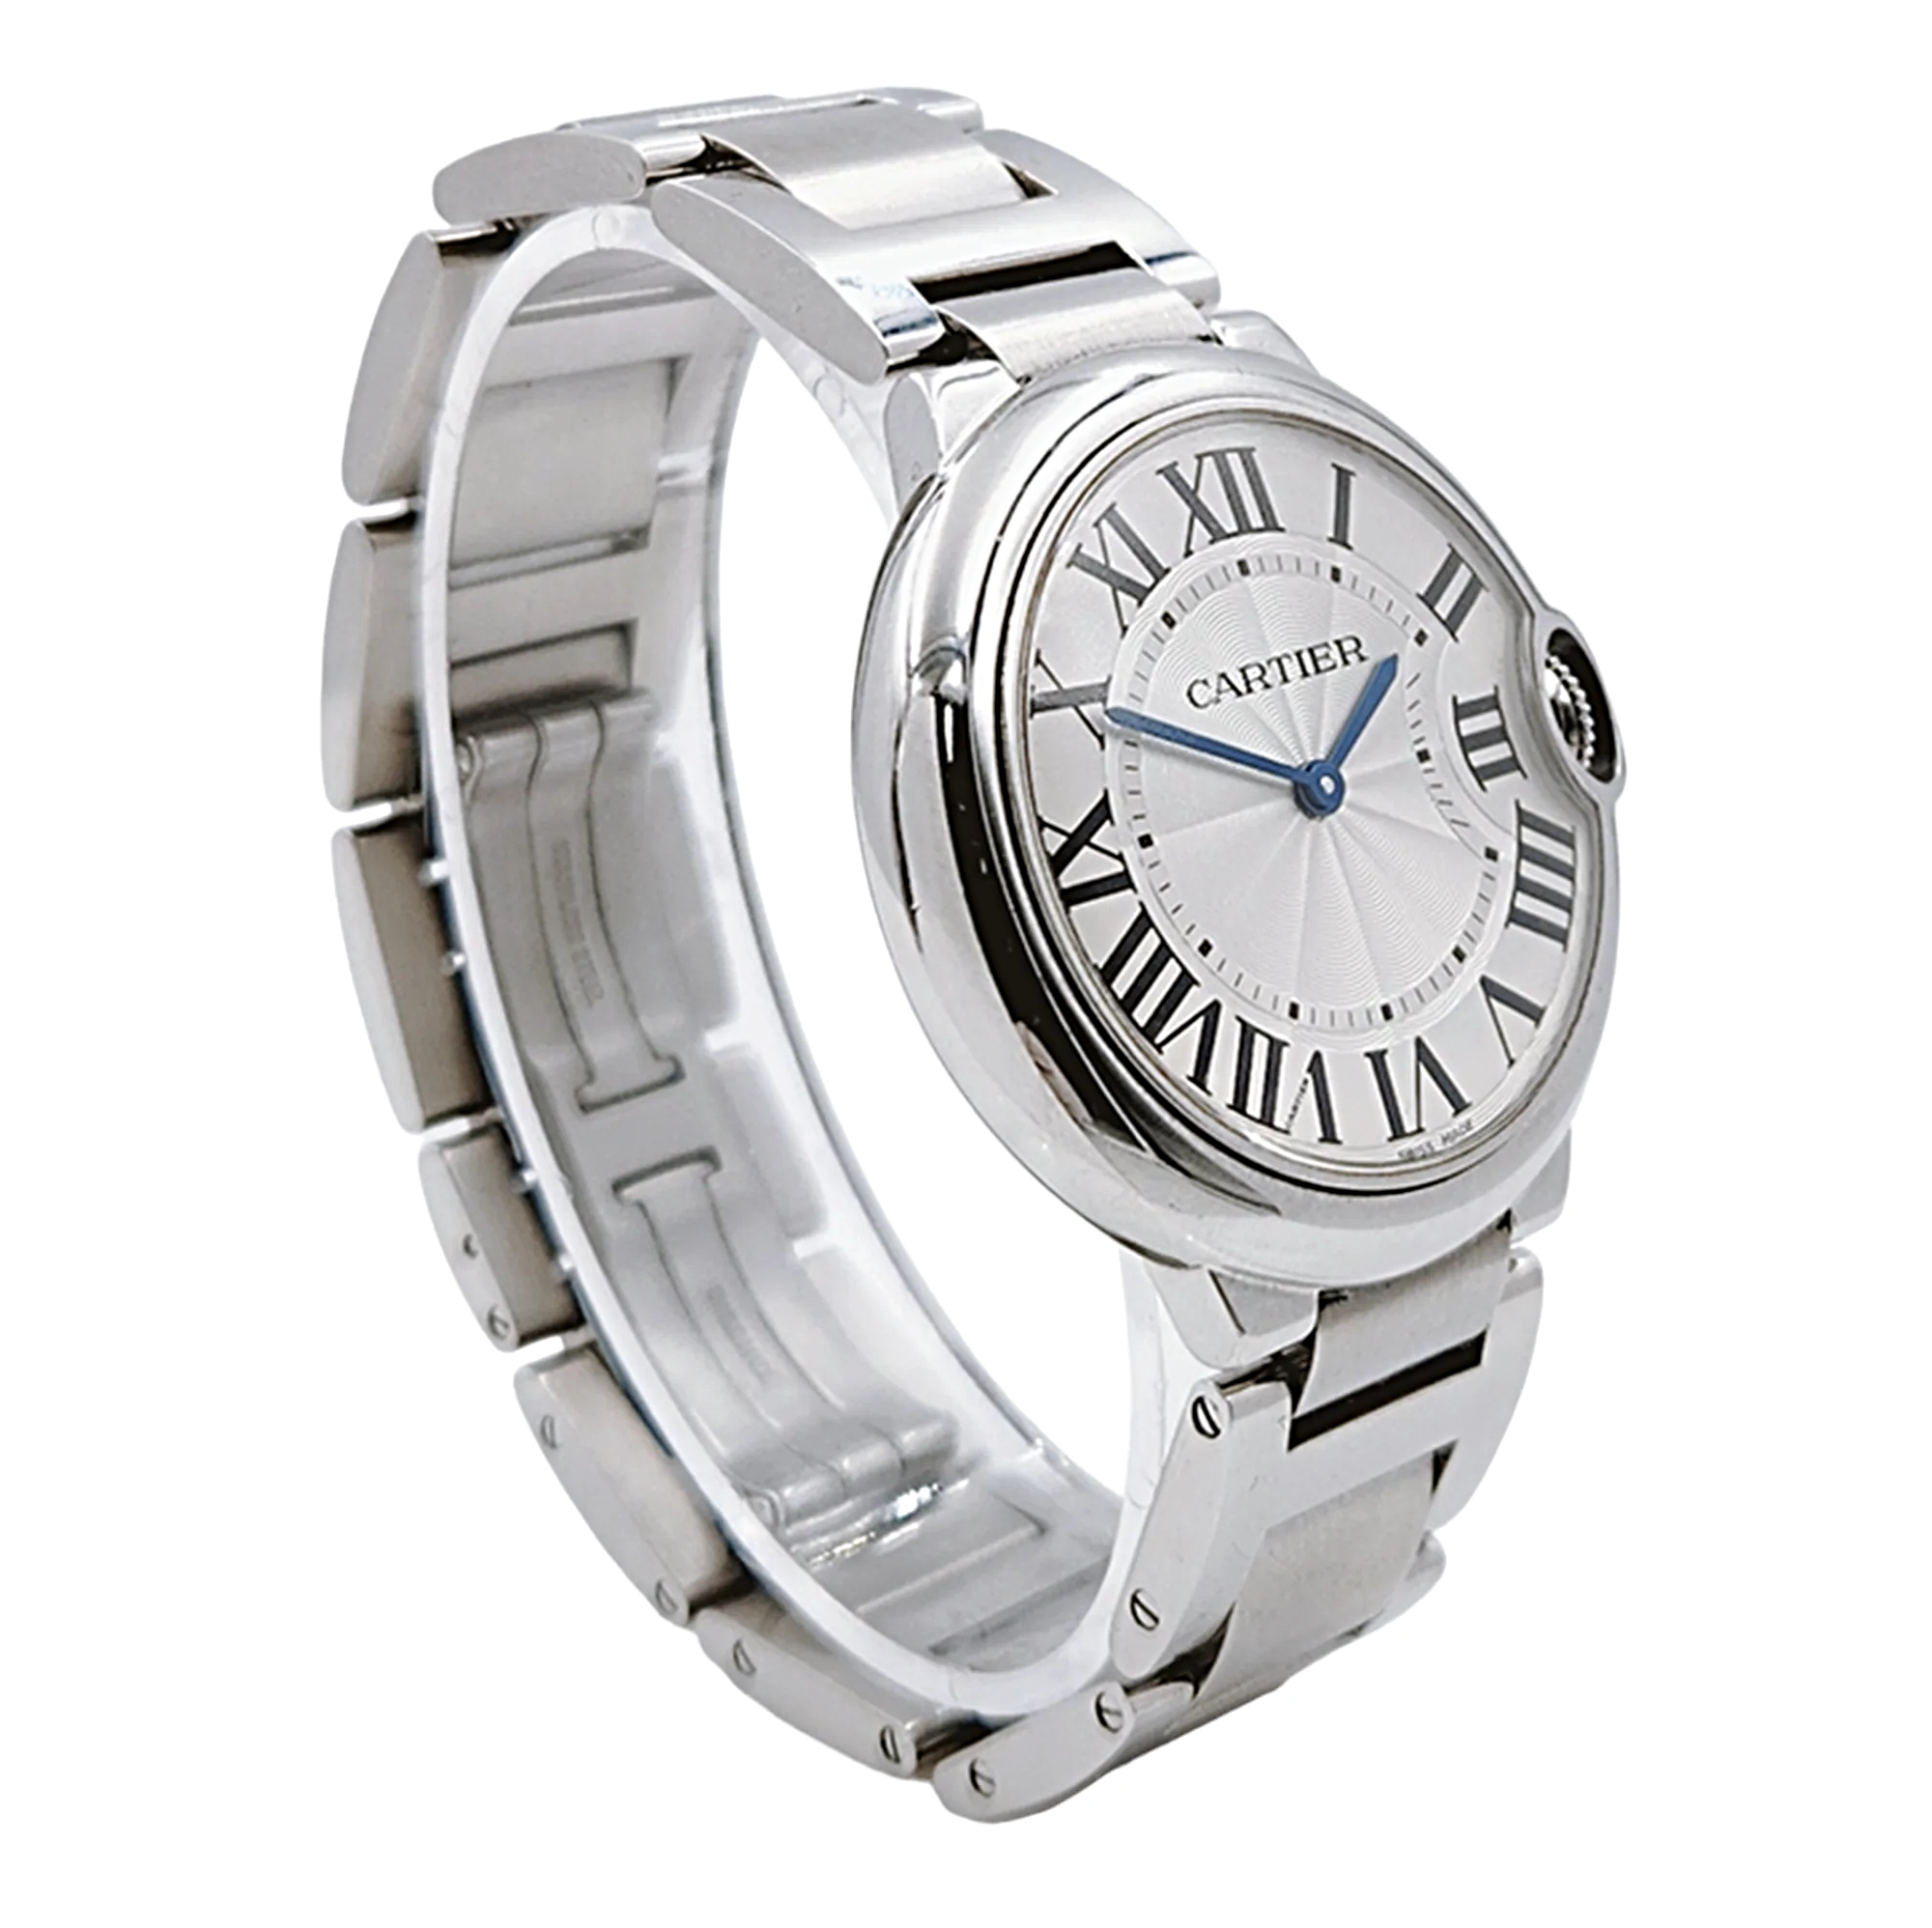 Ladies Cartier 36mm Ballon Bleu Automatic Stainless Steel Watch with Roman Numeral Silver Dial and Smooth Bezel. (Pre-Owned)